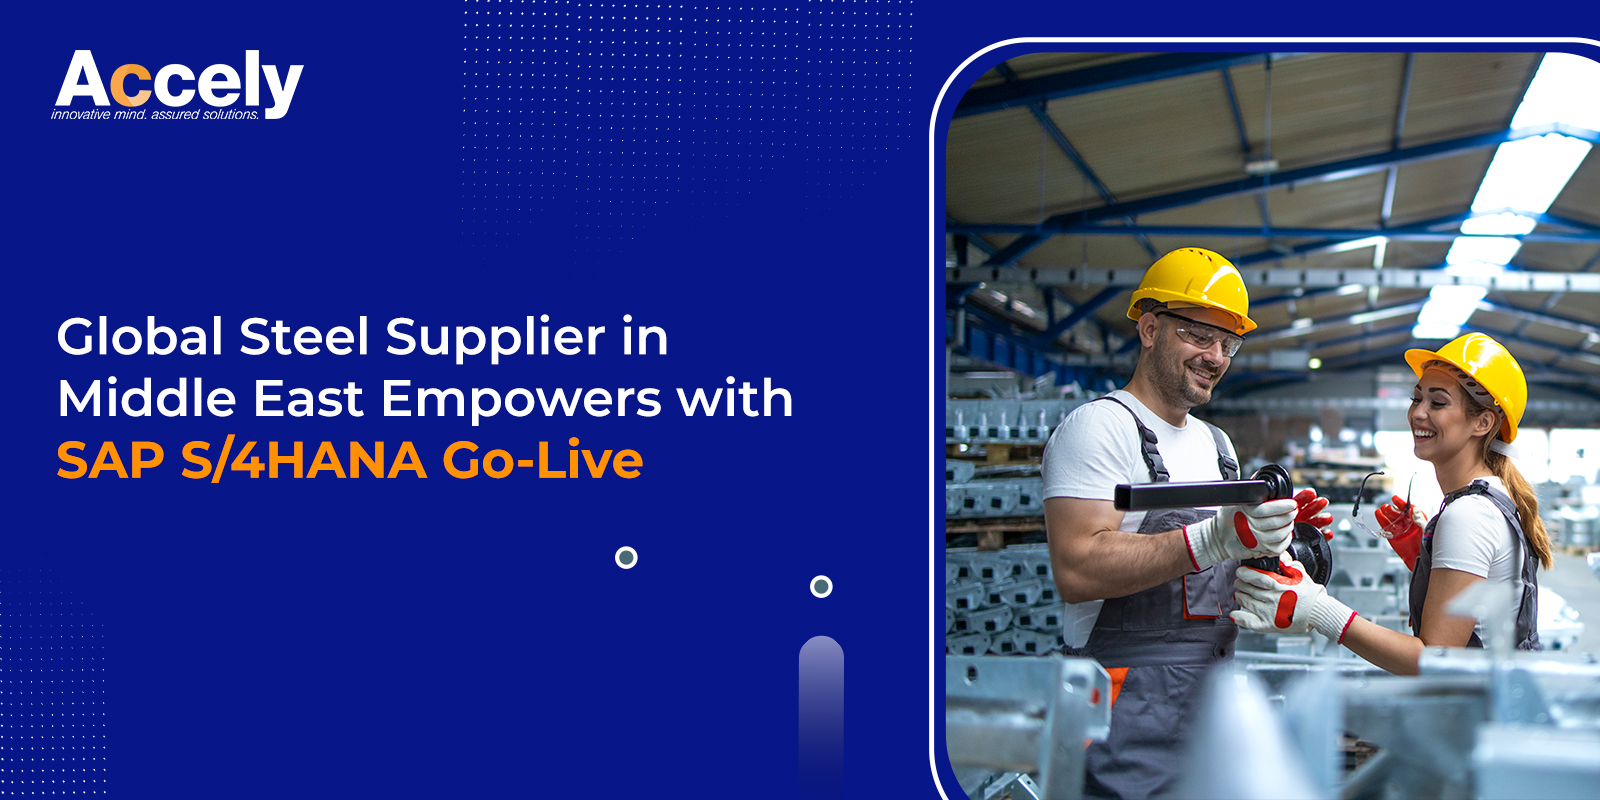 Global Steel Supplier in Middle East Empowers with SAP S/4HANA Go-Live